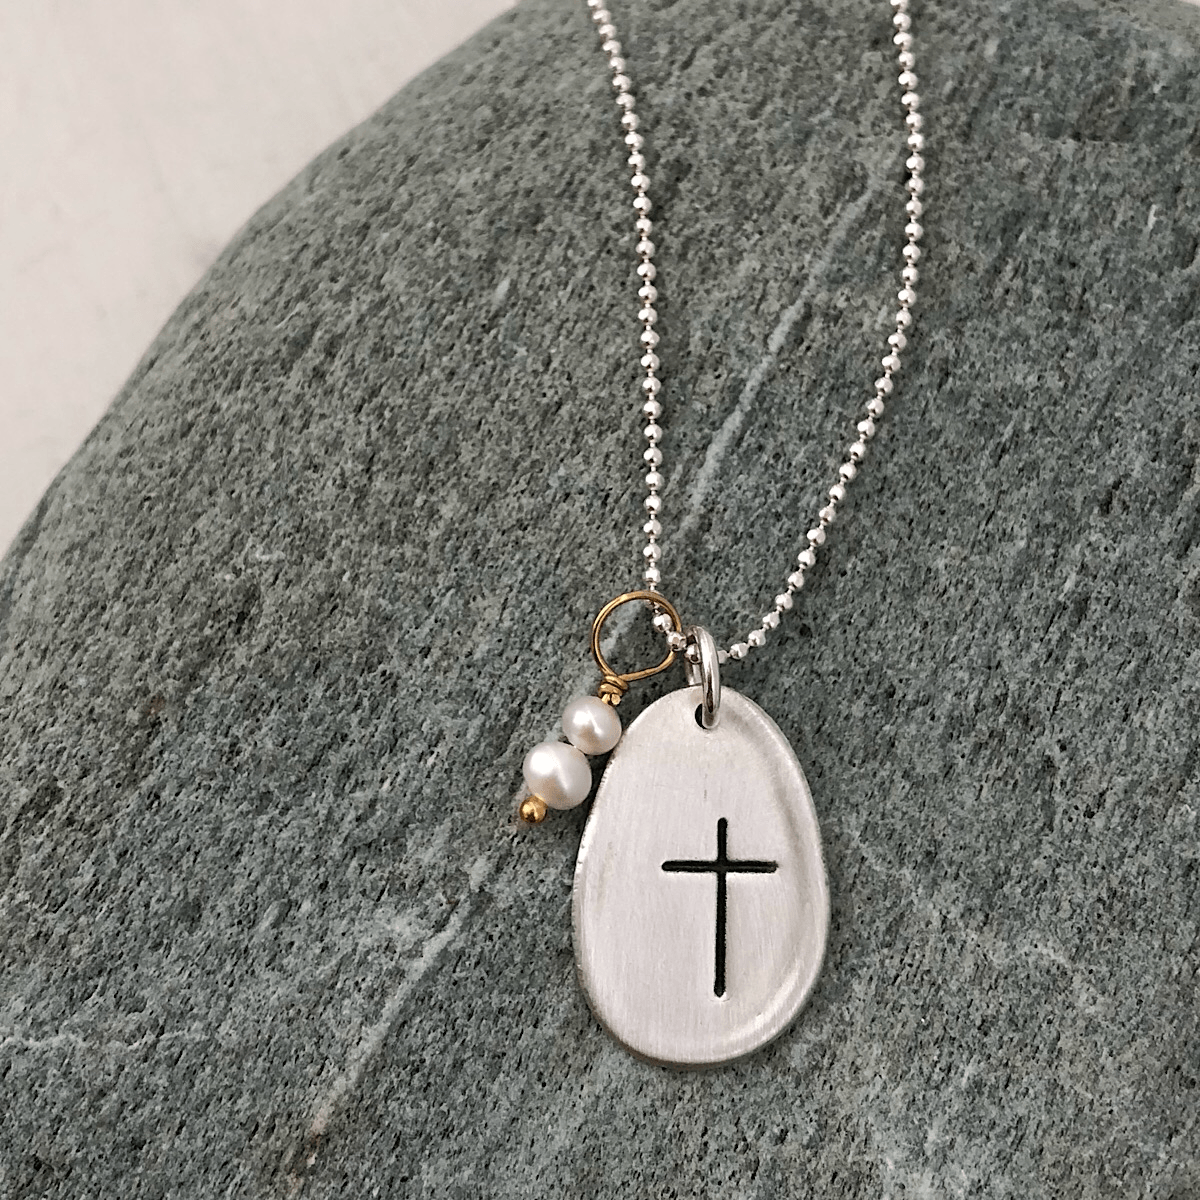 Have Faith Pebble Necklace - IsabelleGraceJewelry